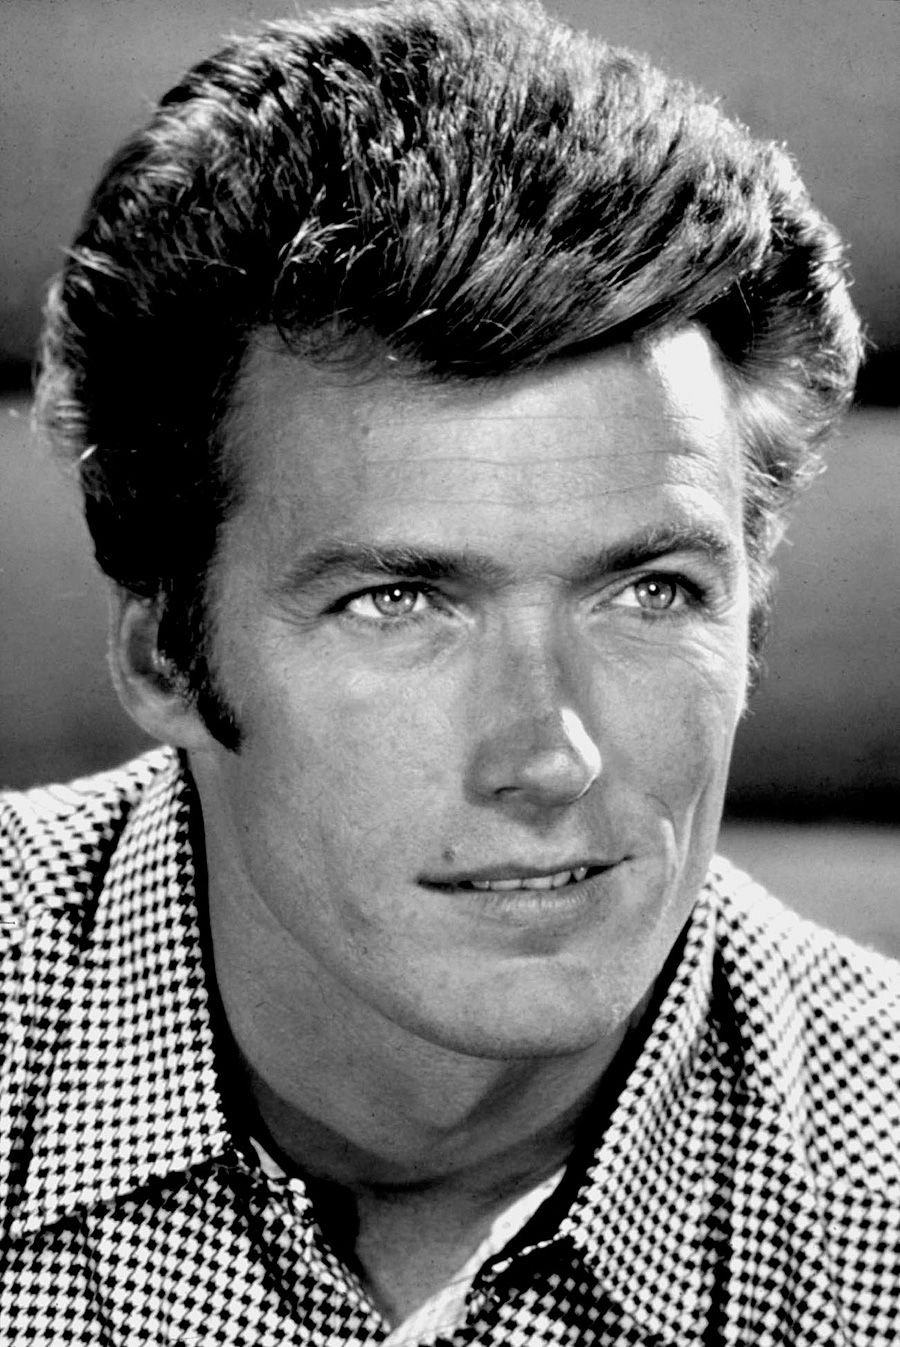 Happy Birthday to Clint Eastwood! He turns 88 today. 